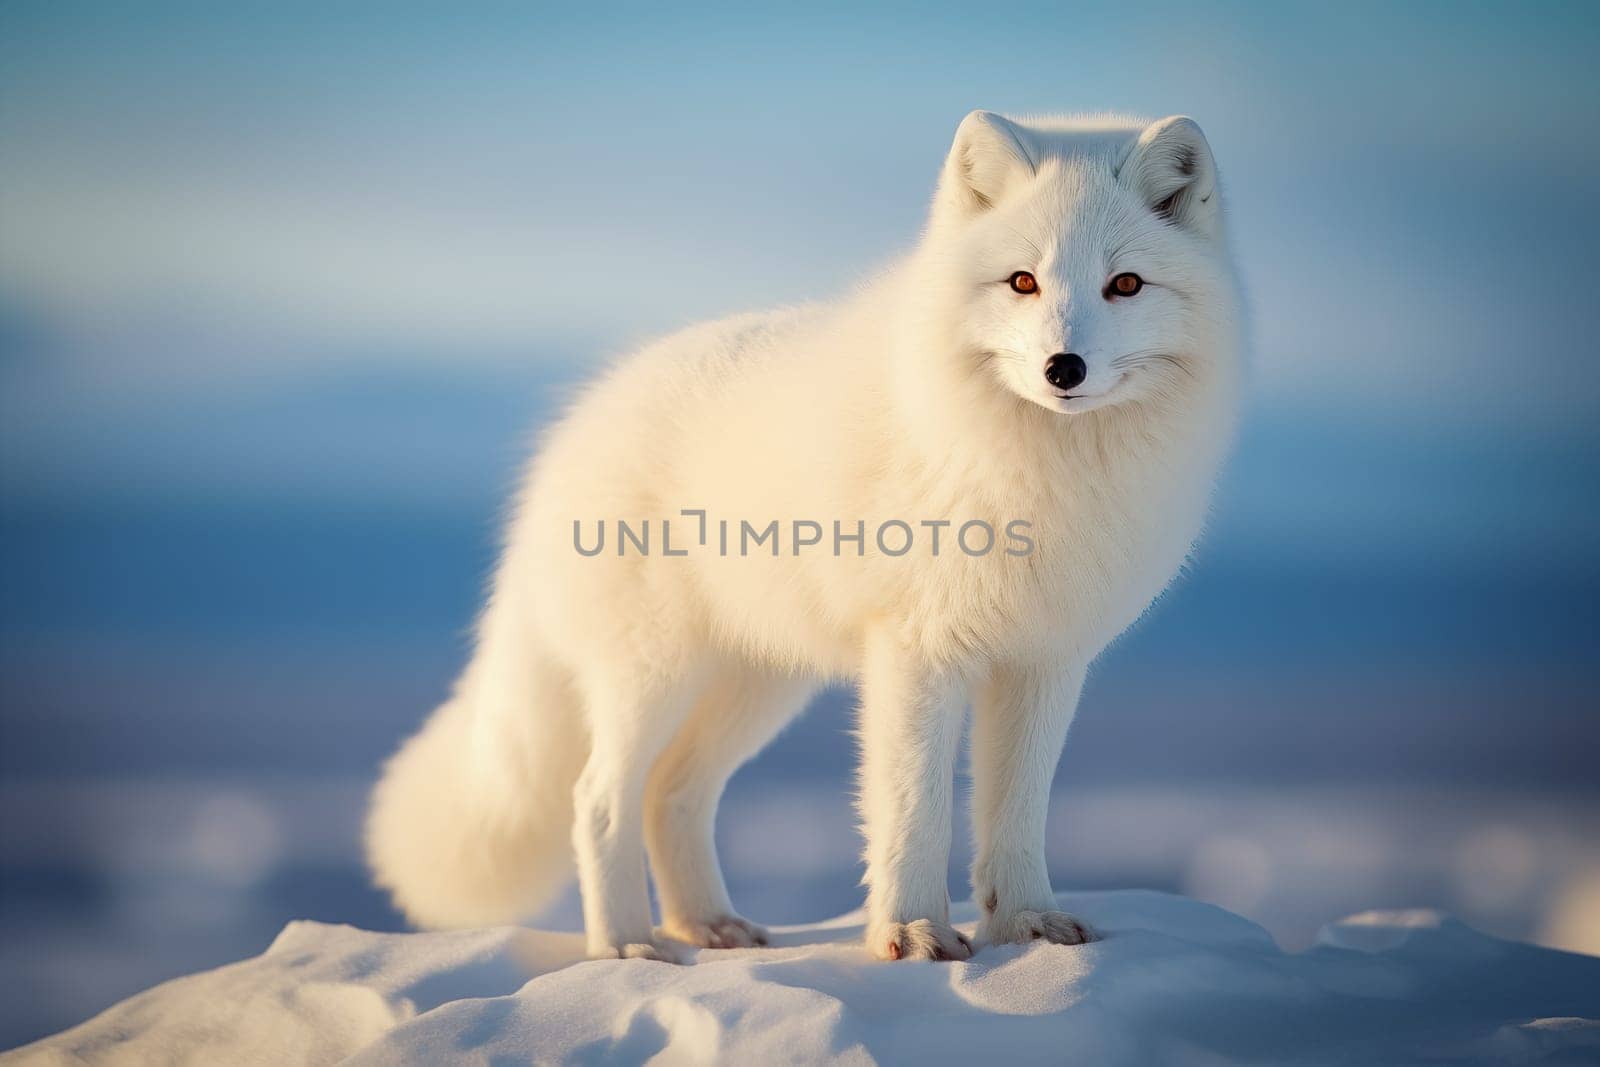 White Arctic fox standing on a snowy hill. The beauty and resilience of the fox in its natural habitat